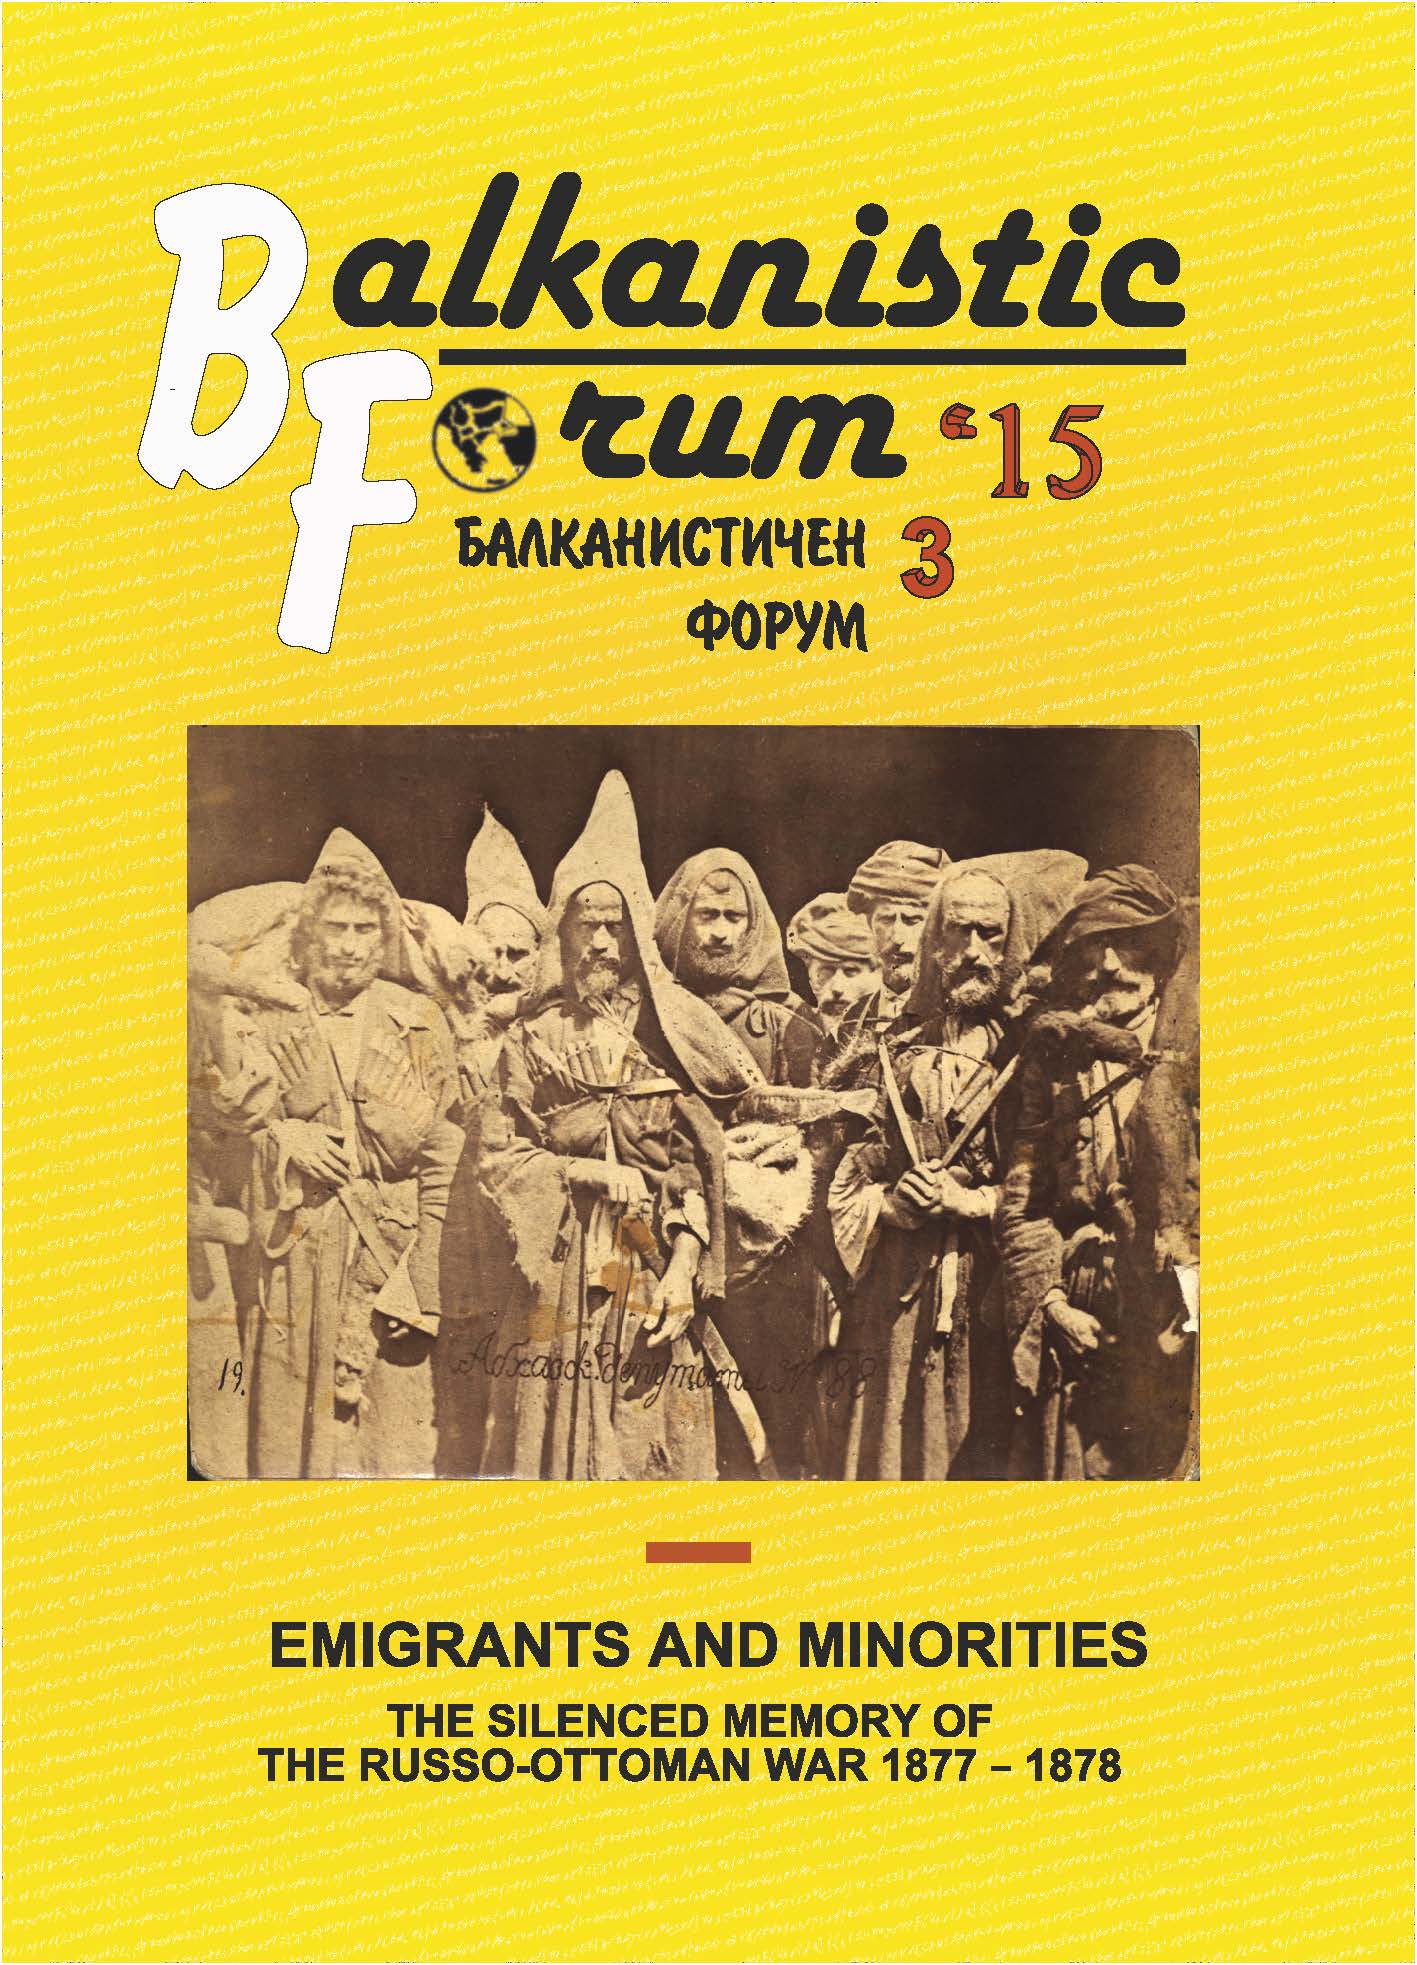 Local and Family Memory of Georgian Muslims and its Role in Cultural Development Cover Image